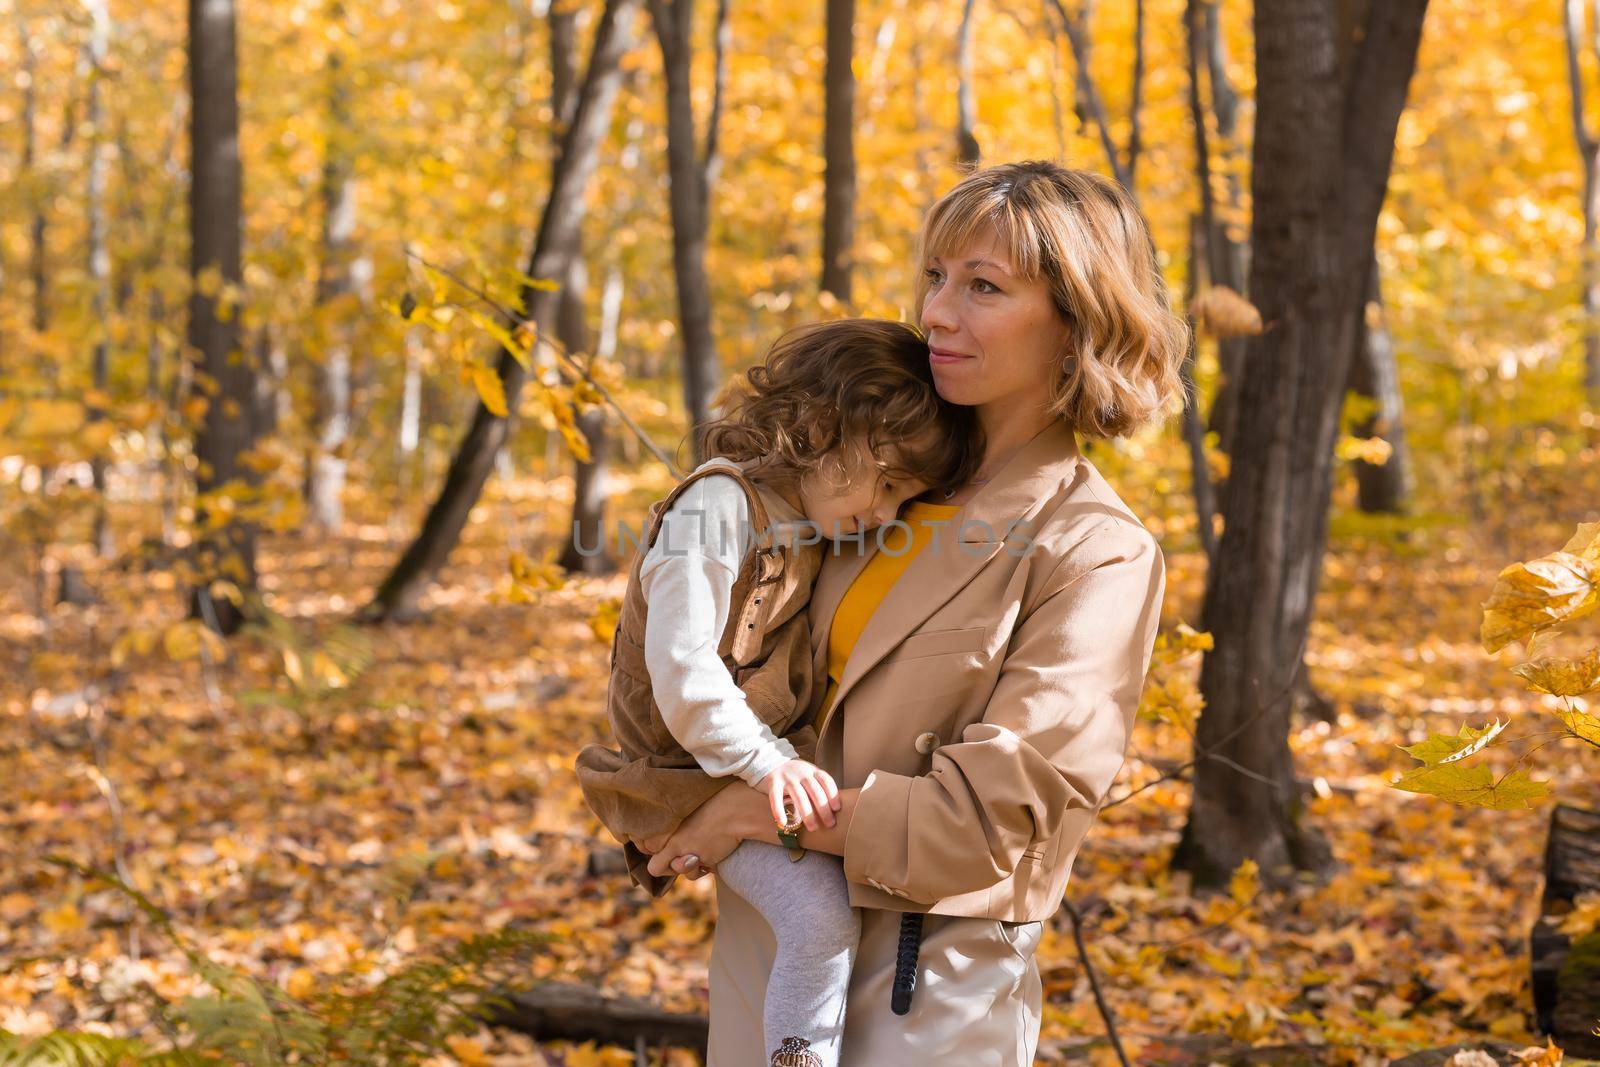 Mother with child in her arms against background of autumn nature. Family and season concept. by Satura86